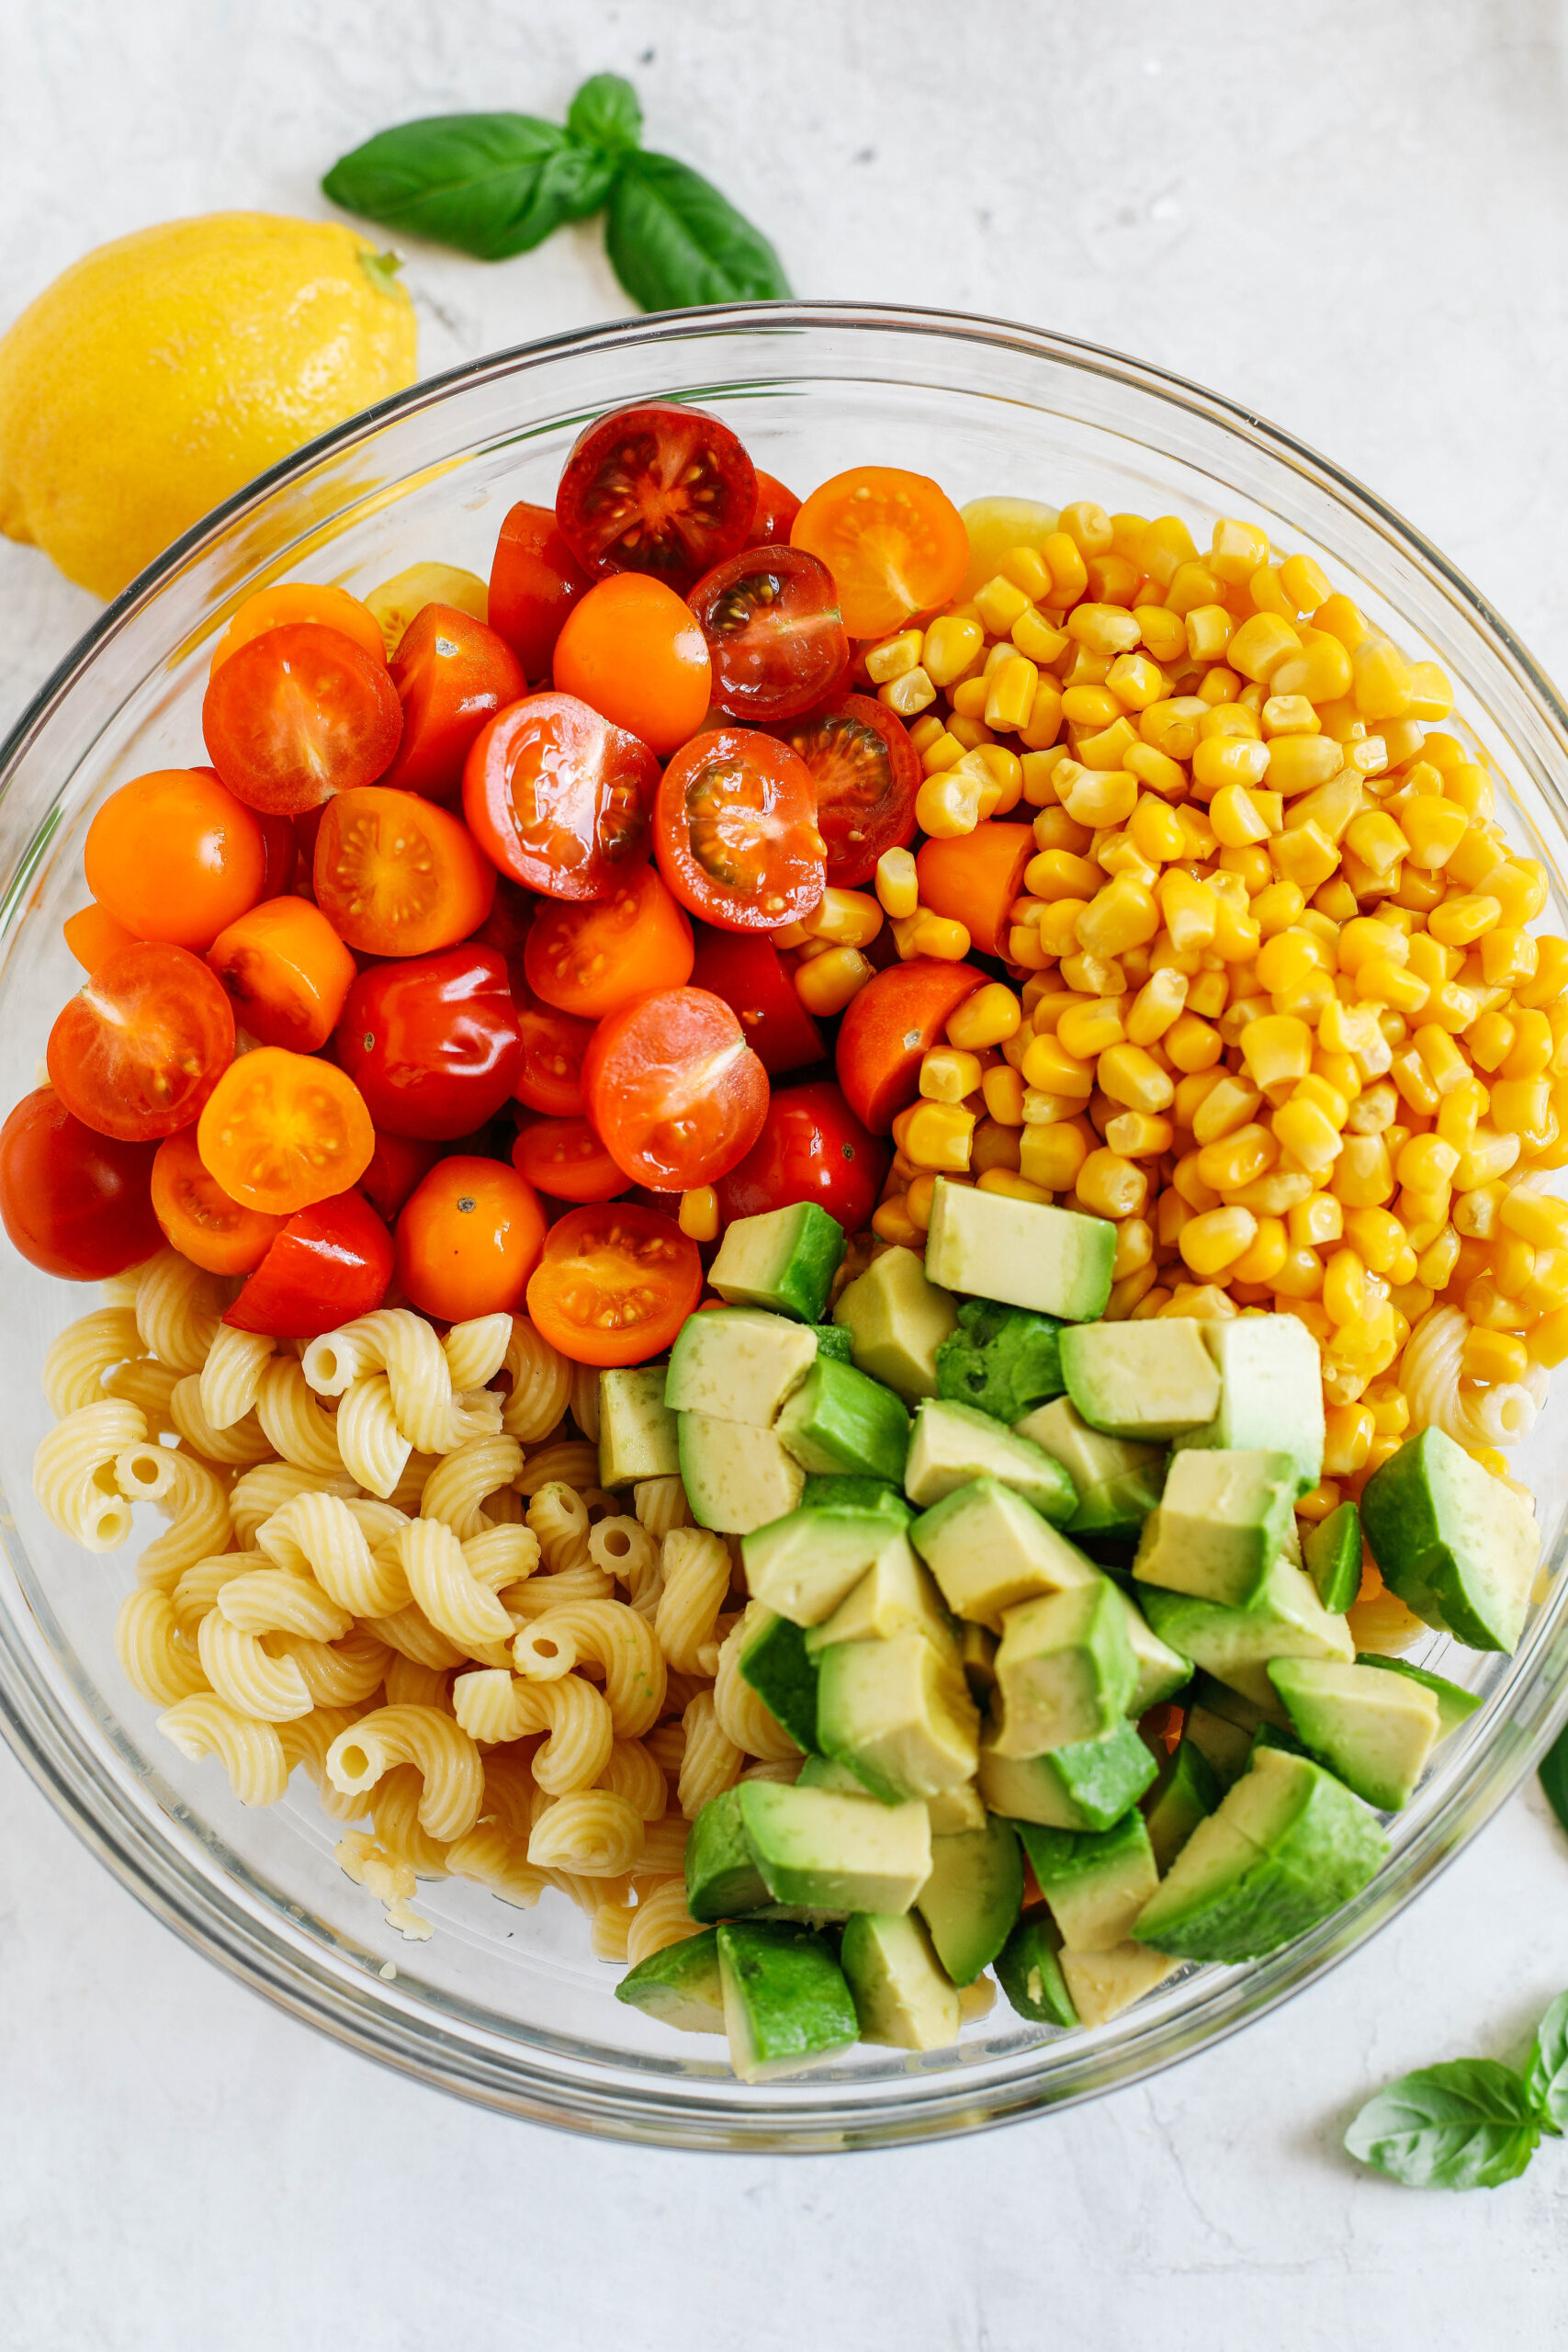 This EASY 10-minute Summer Pesto Pasta Salad is loaded with fresh ingredients like juicy tomatoes, corn, avocado, garlic, and lemon zest, all tossed together with warm pasta and delicious basil pesto!